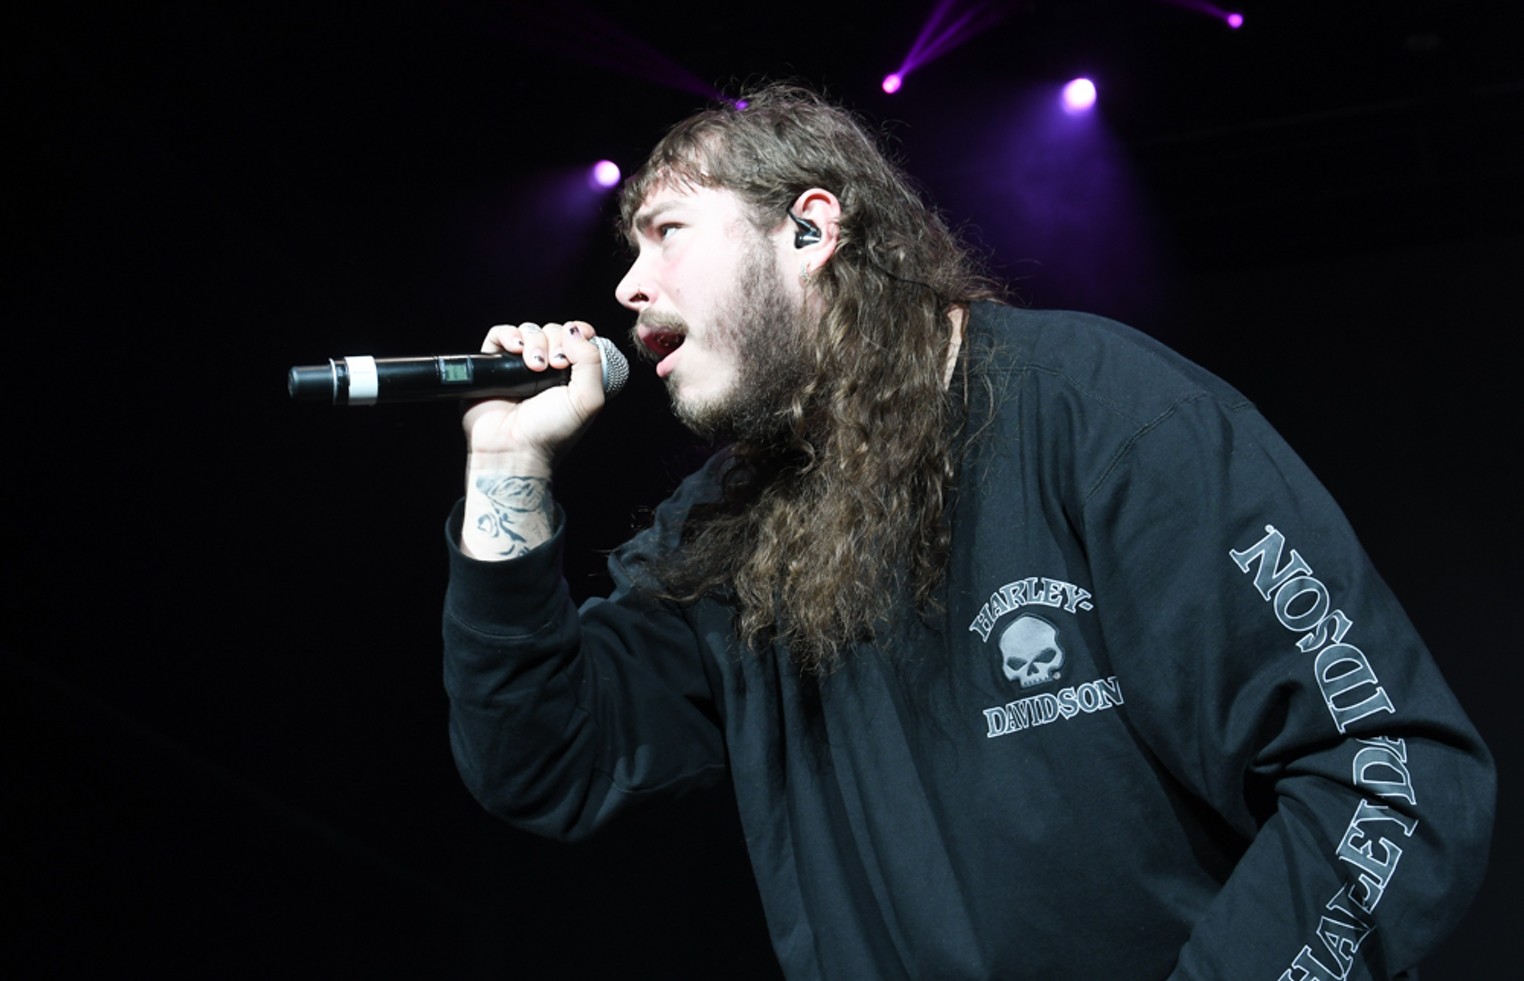 Post Malone feat. 21 Savage's 'Rockstar': Songs That Defined the Decade